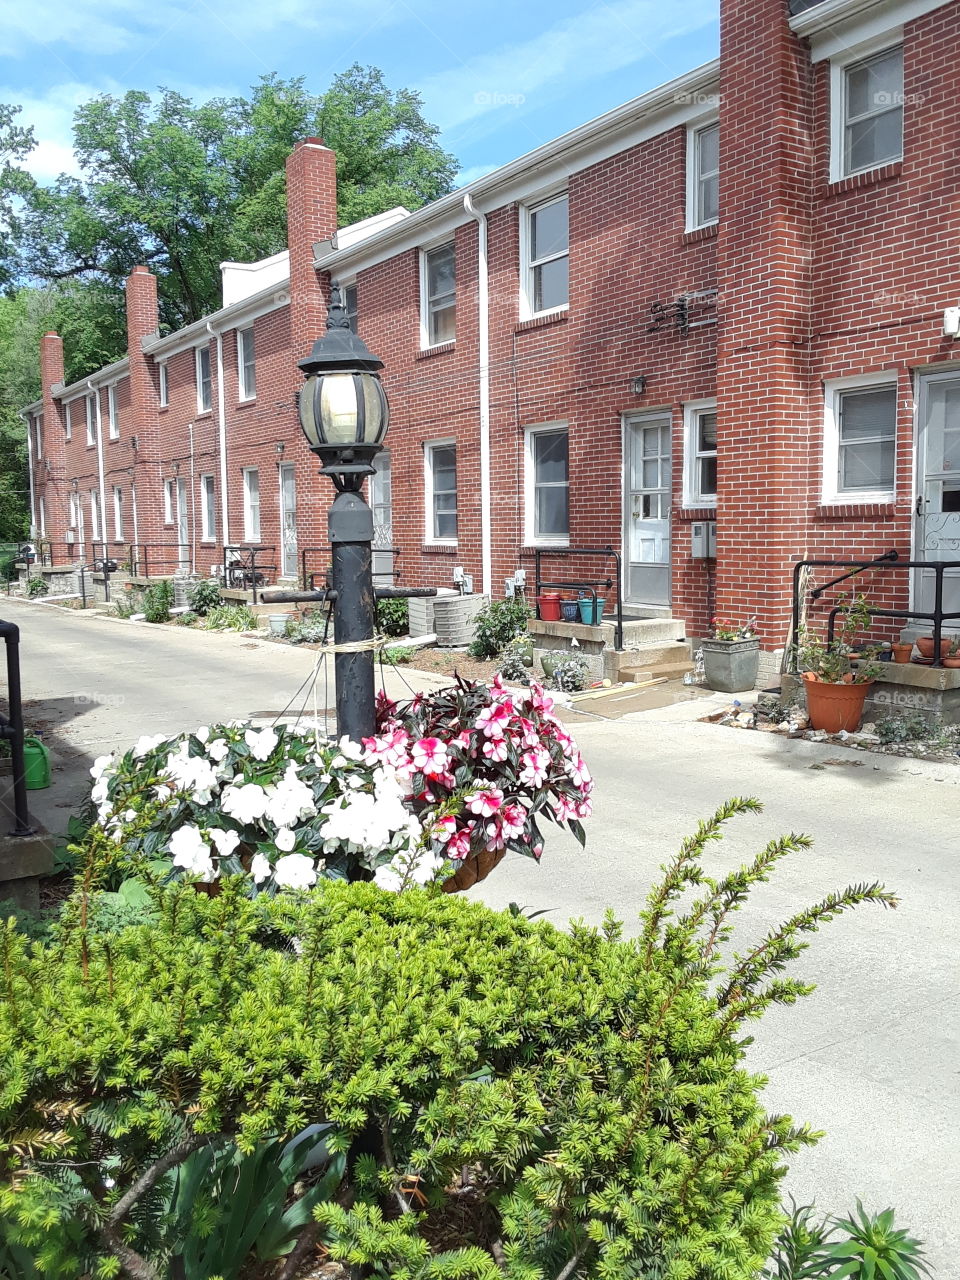 Brick apartments with iron lamppost and flowers